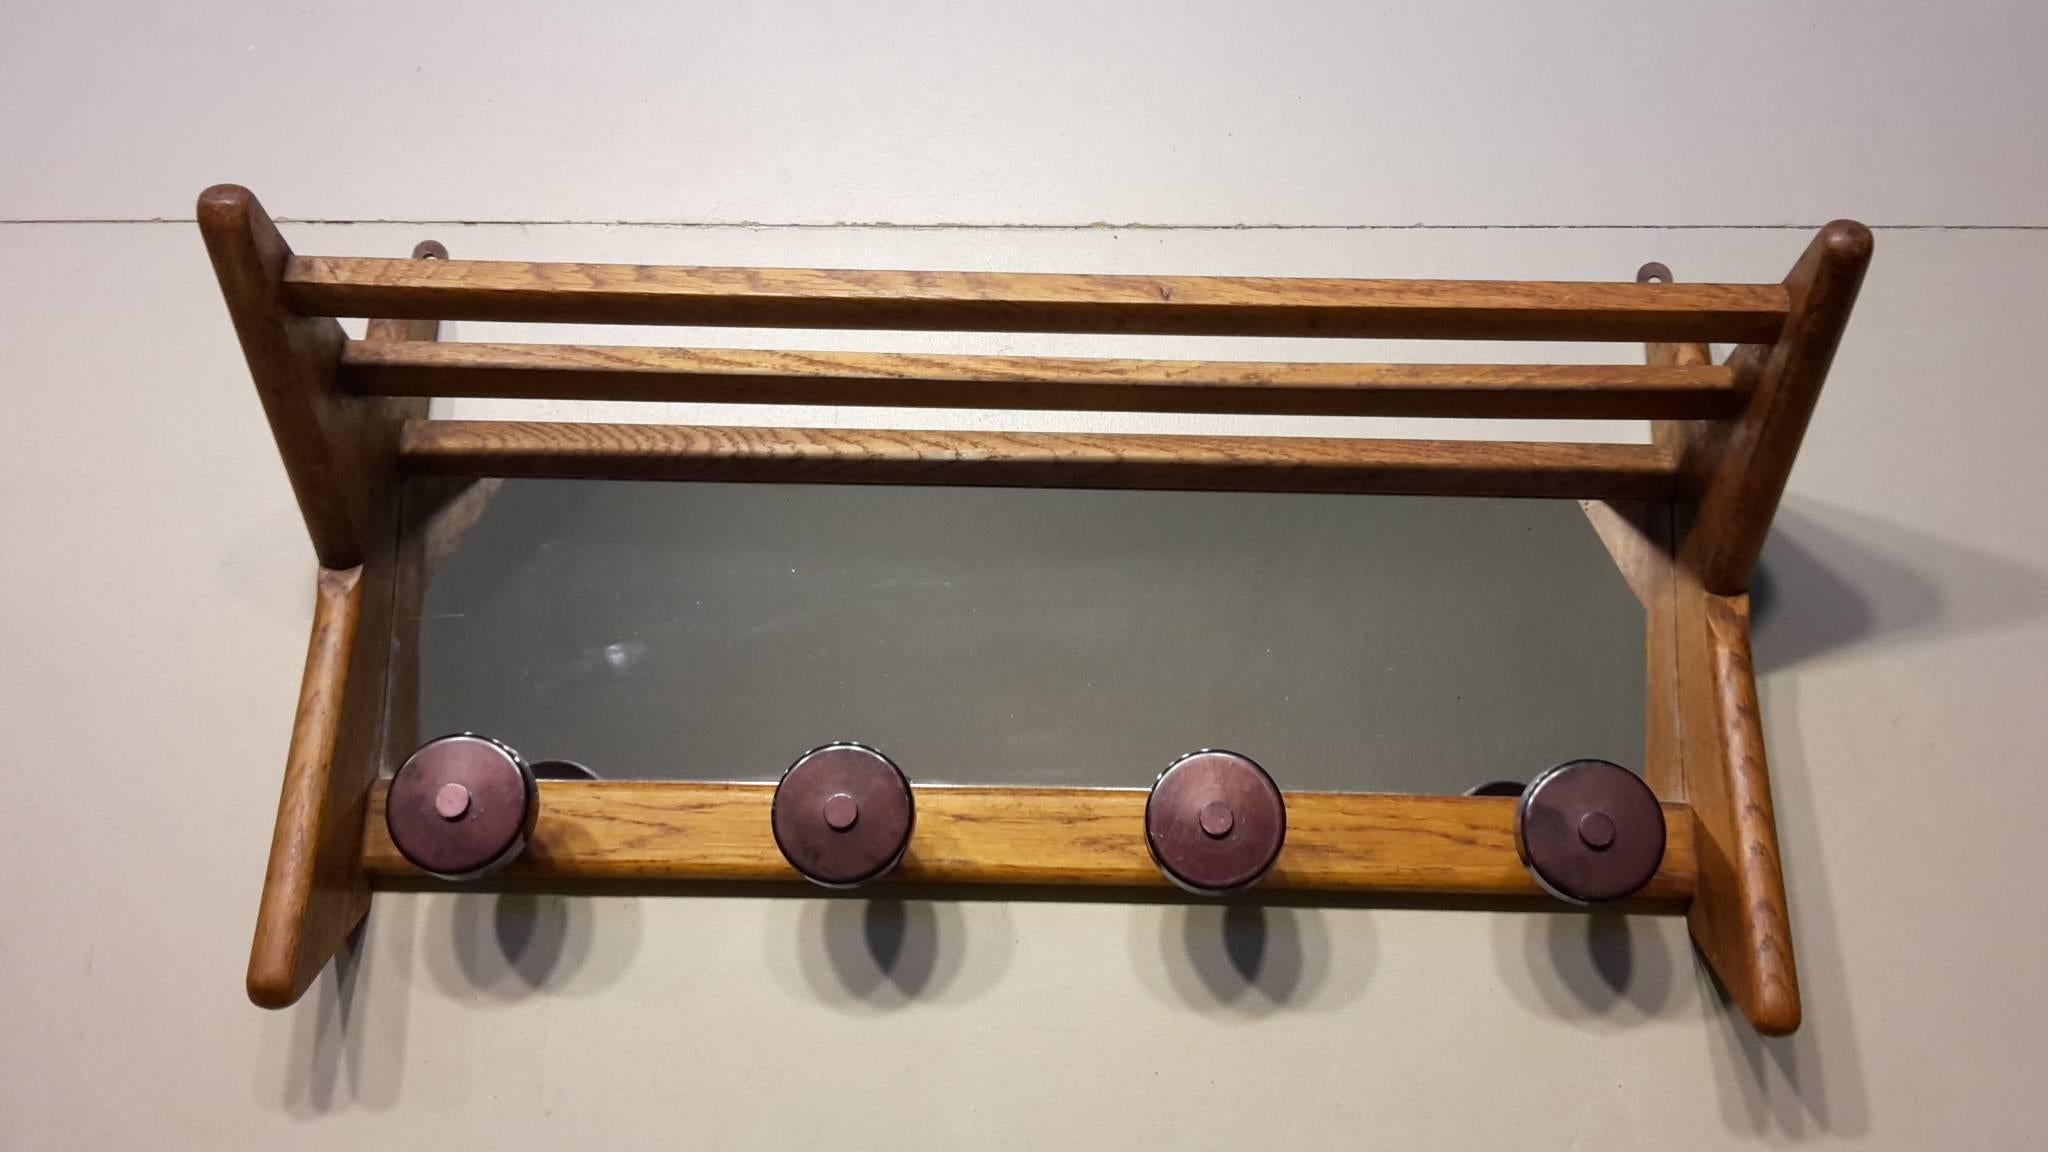 20th century French wall coat rack made of oak by Guillerme and Chambron from the 1960s.